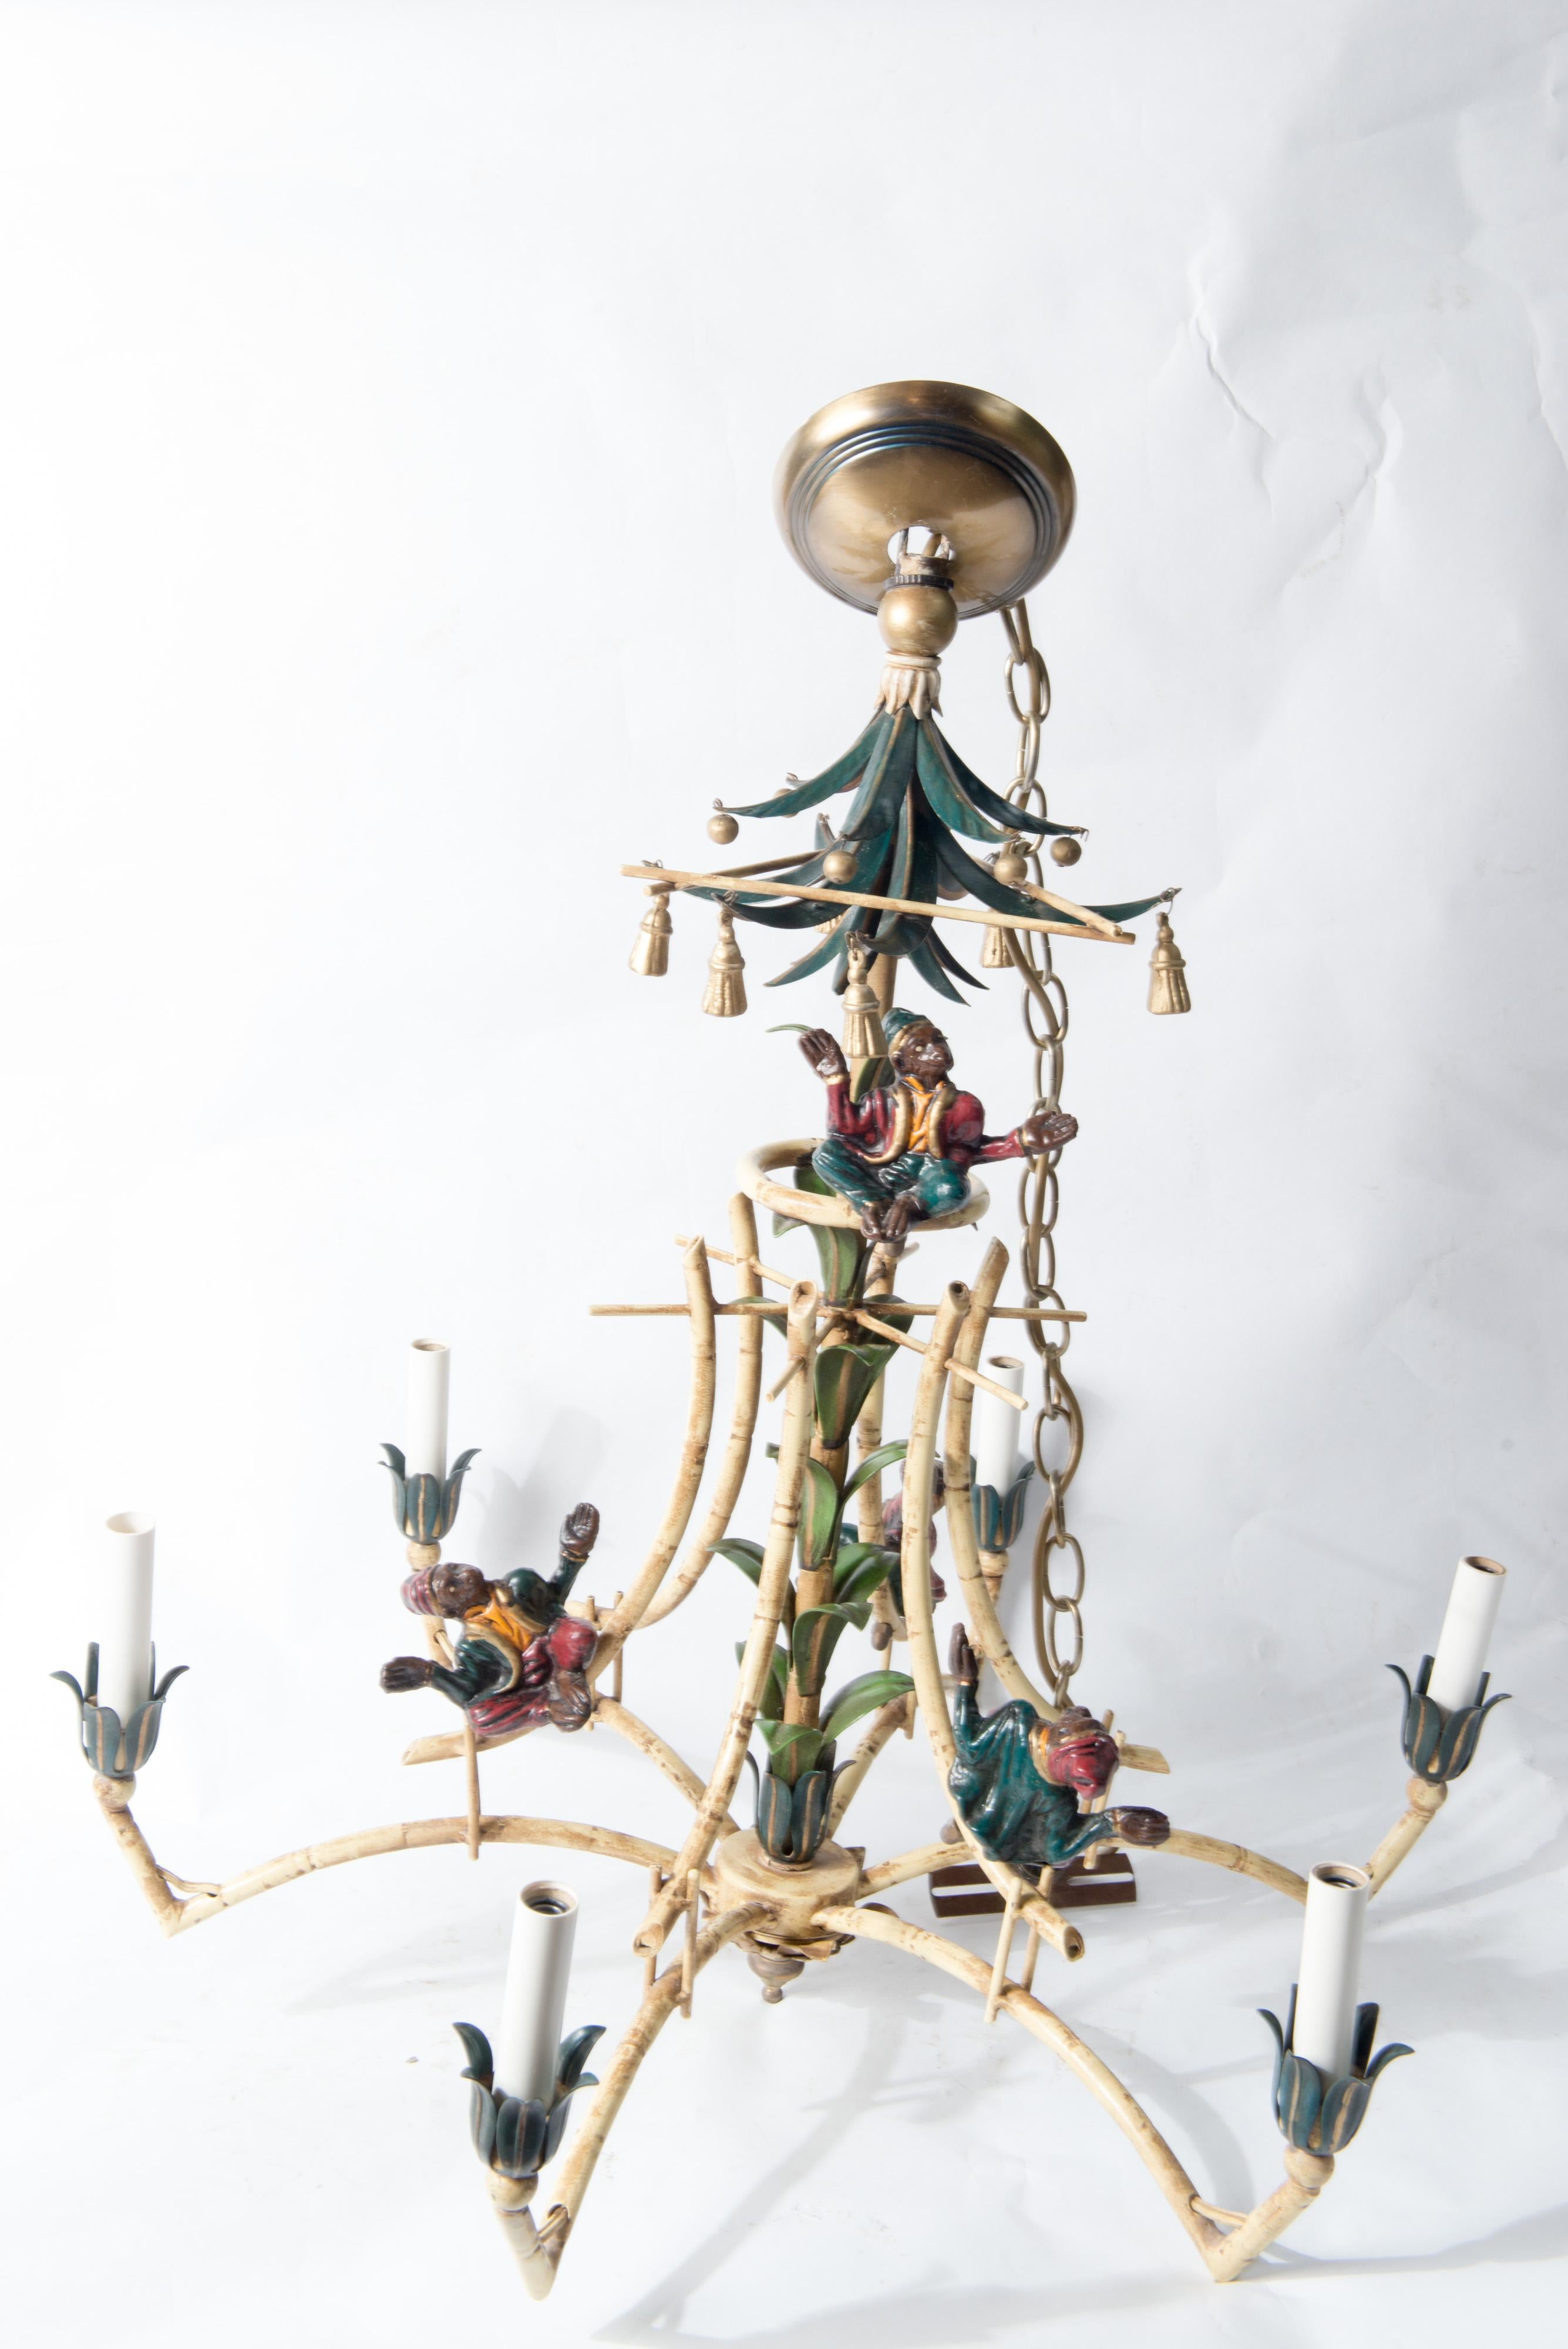 Late 20th Century Chinoiserie Chandelier with Monkeys & Tassels